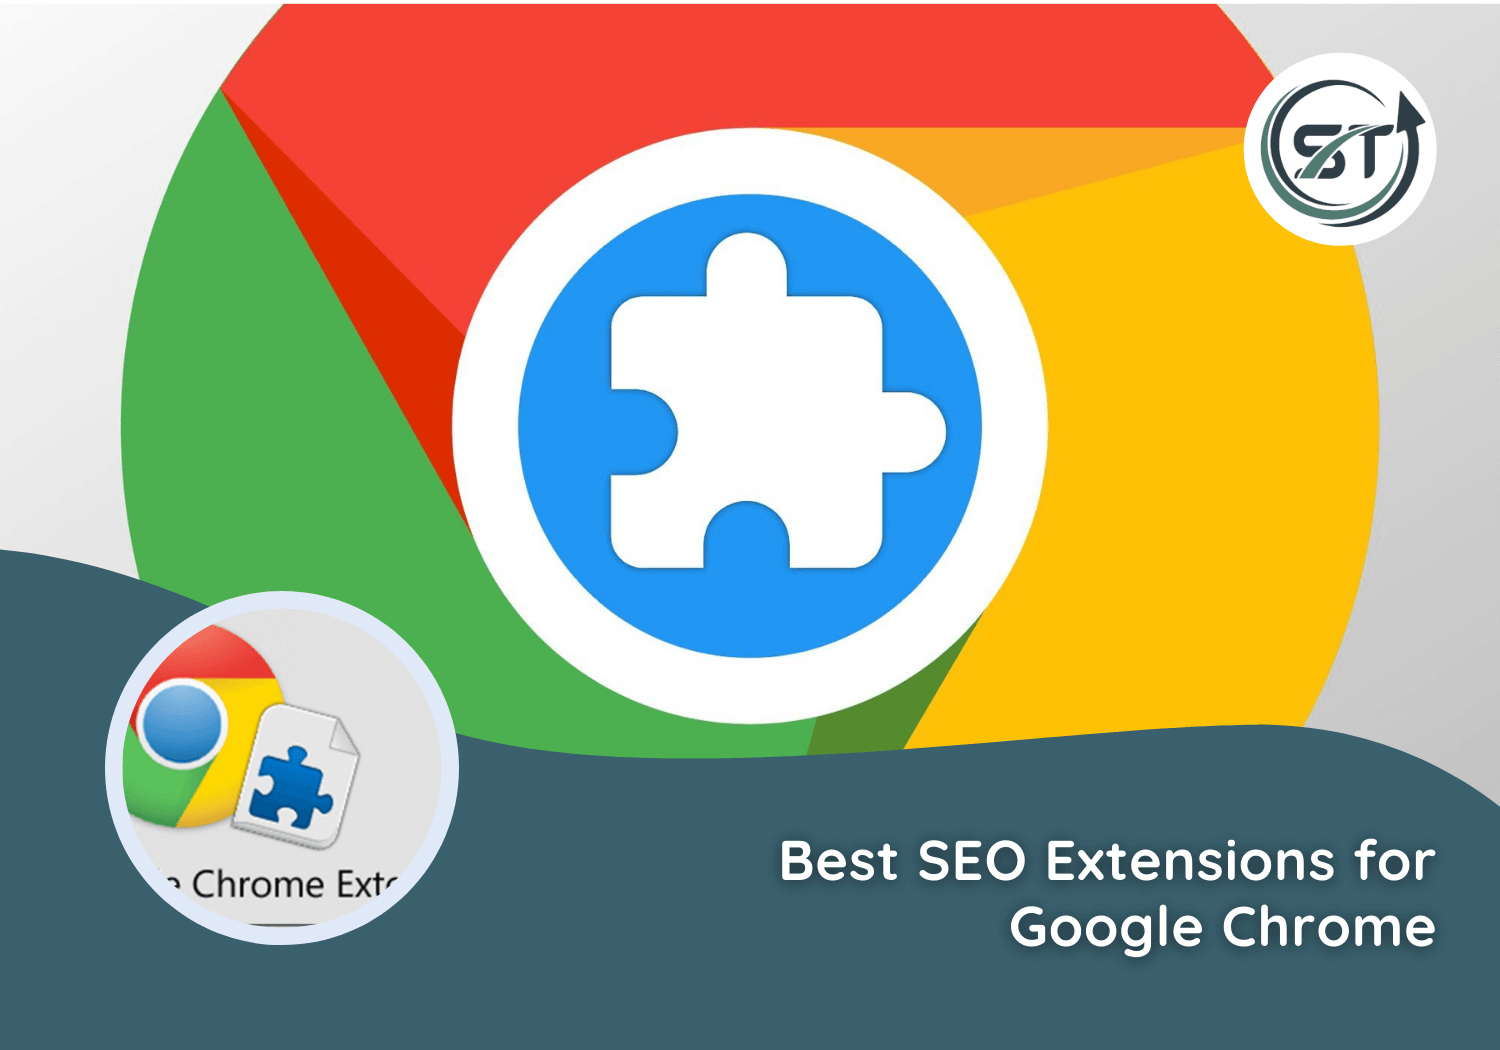 Best SEO Extensions for Google Chrome